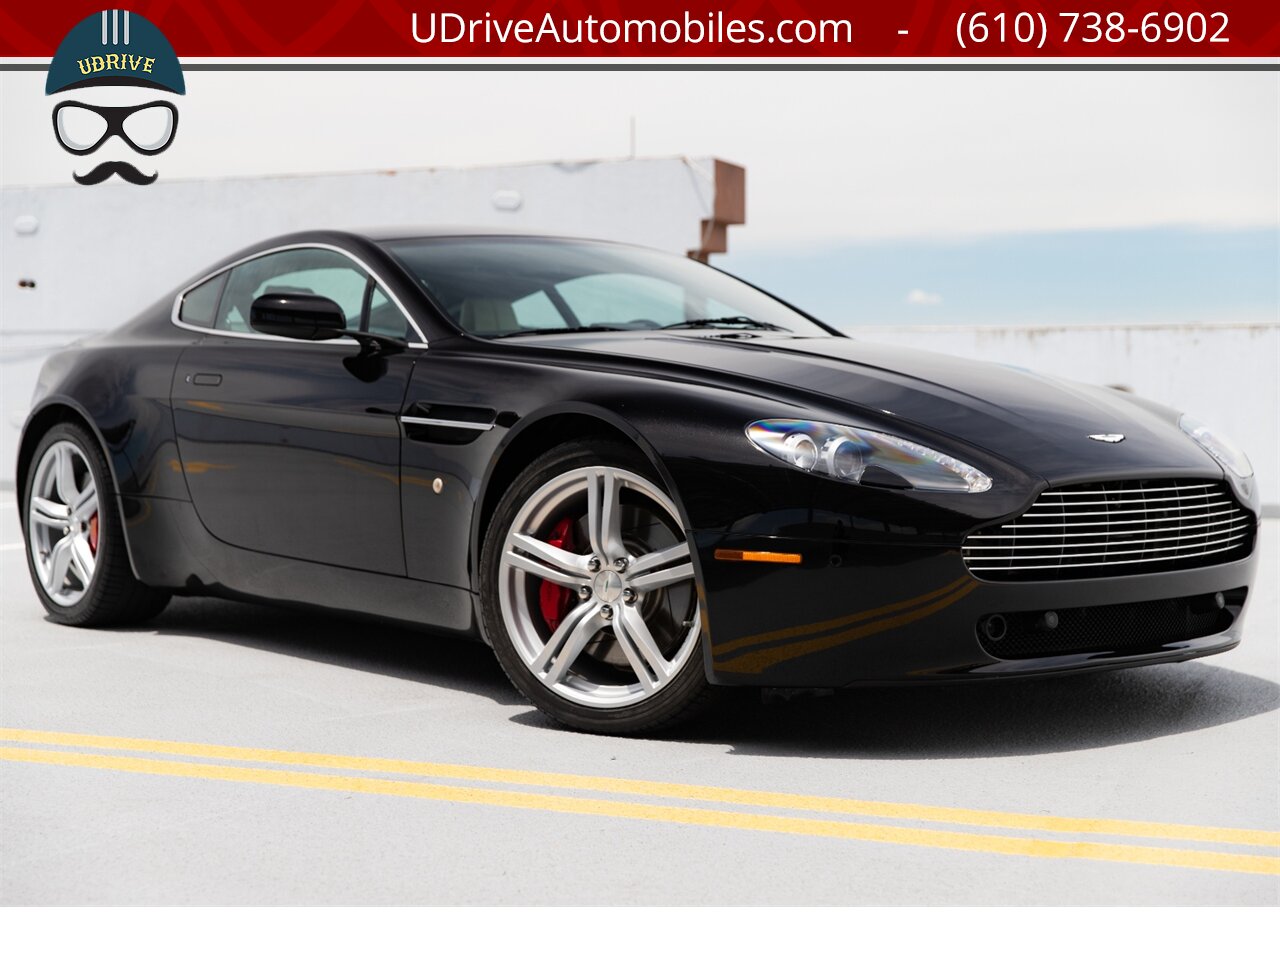 2009 Aston Martin Vantage 6 Speed Manual 1 Owner 12k Miles Sprts Pack NAV  $136,470 MSRP Red Calipers - Photo 3 - West Chester, PA 19382